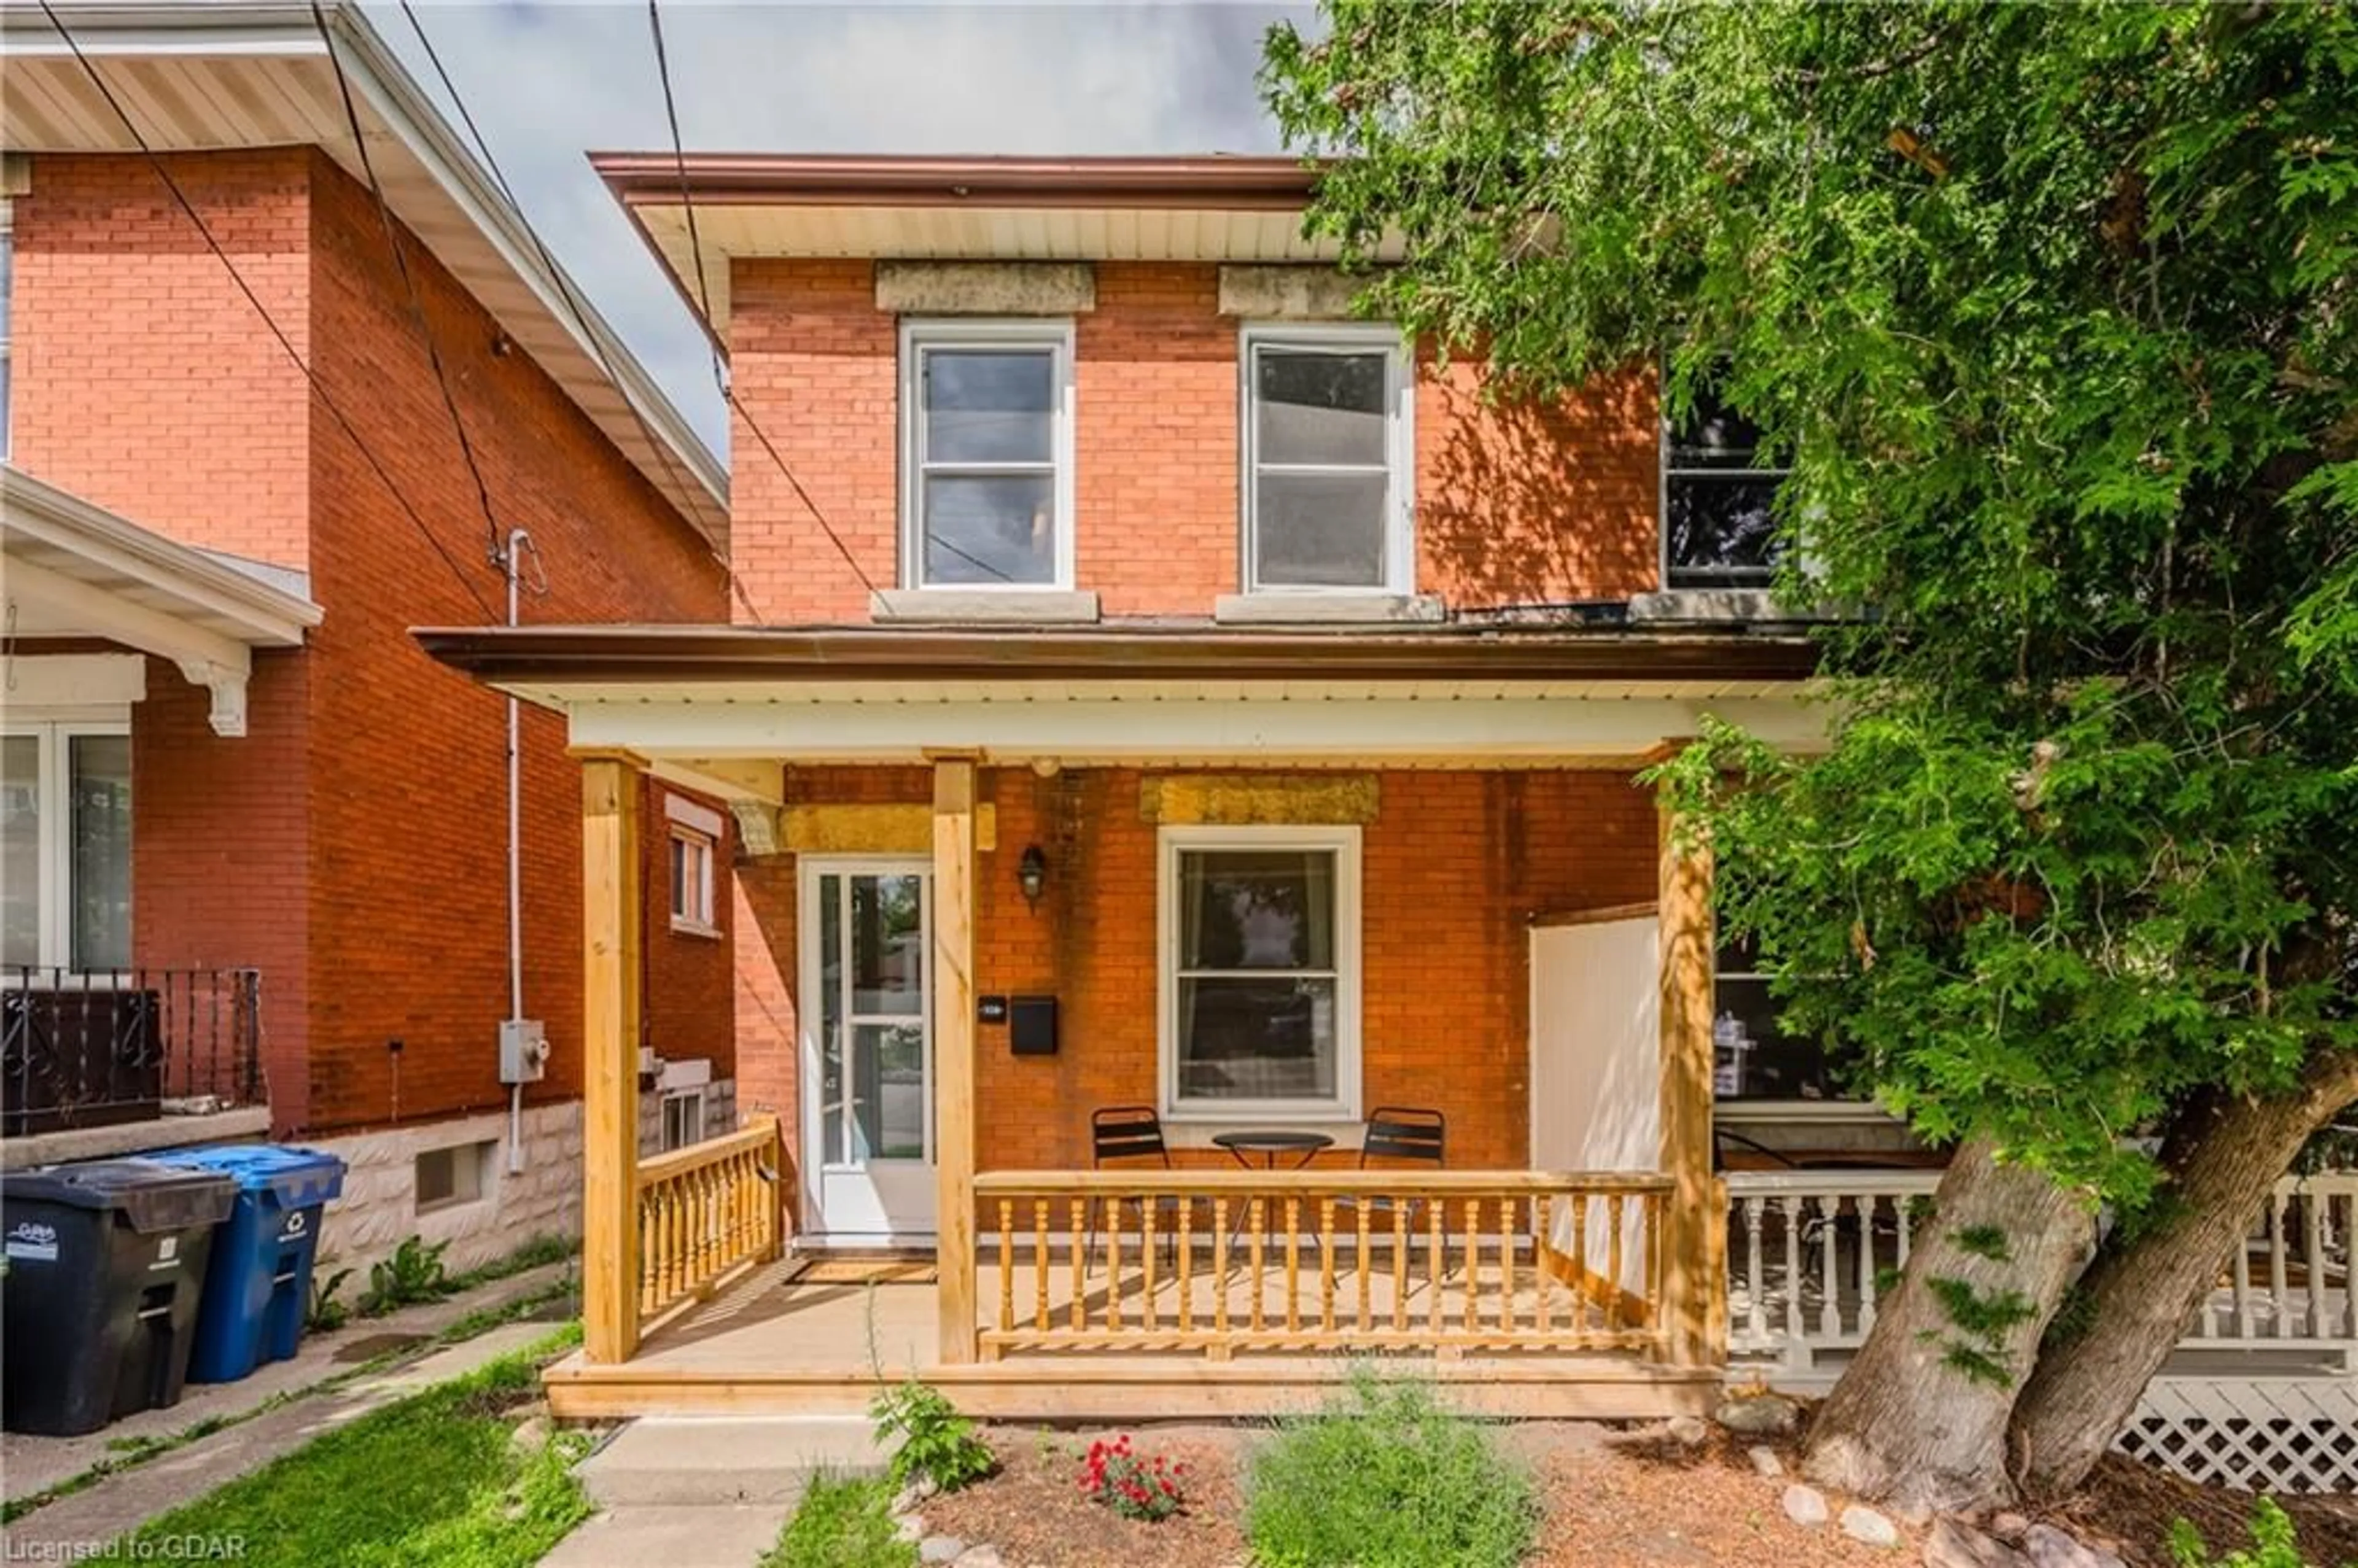 Home with brick exterior material for 108 Harris St, Guelph Ontario N1E 5T1